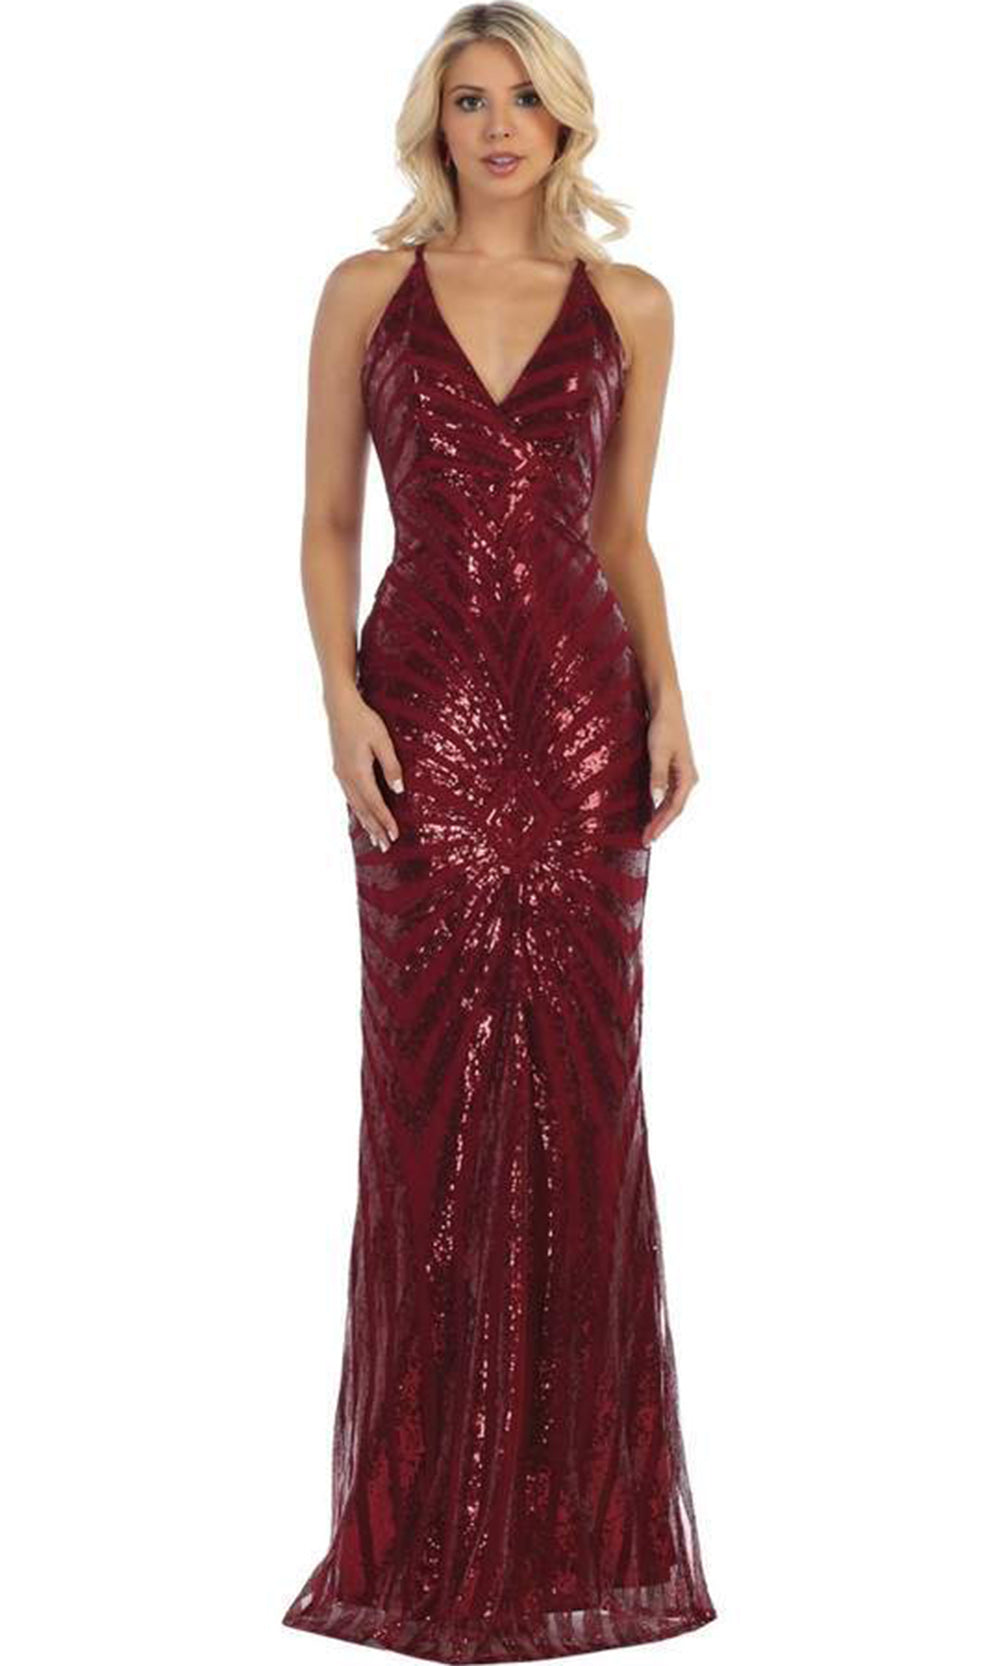 May Queen -  RQ7695SC V Neck Shinny Detailed Hot Dress In Red